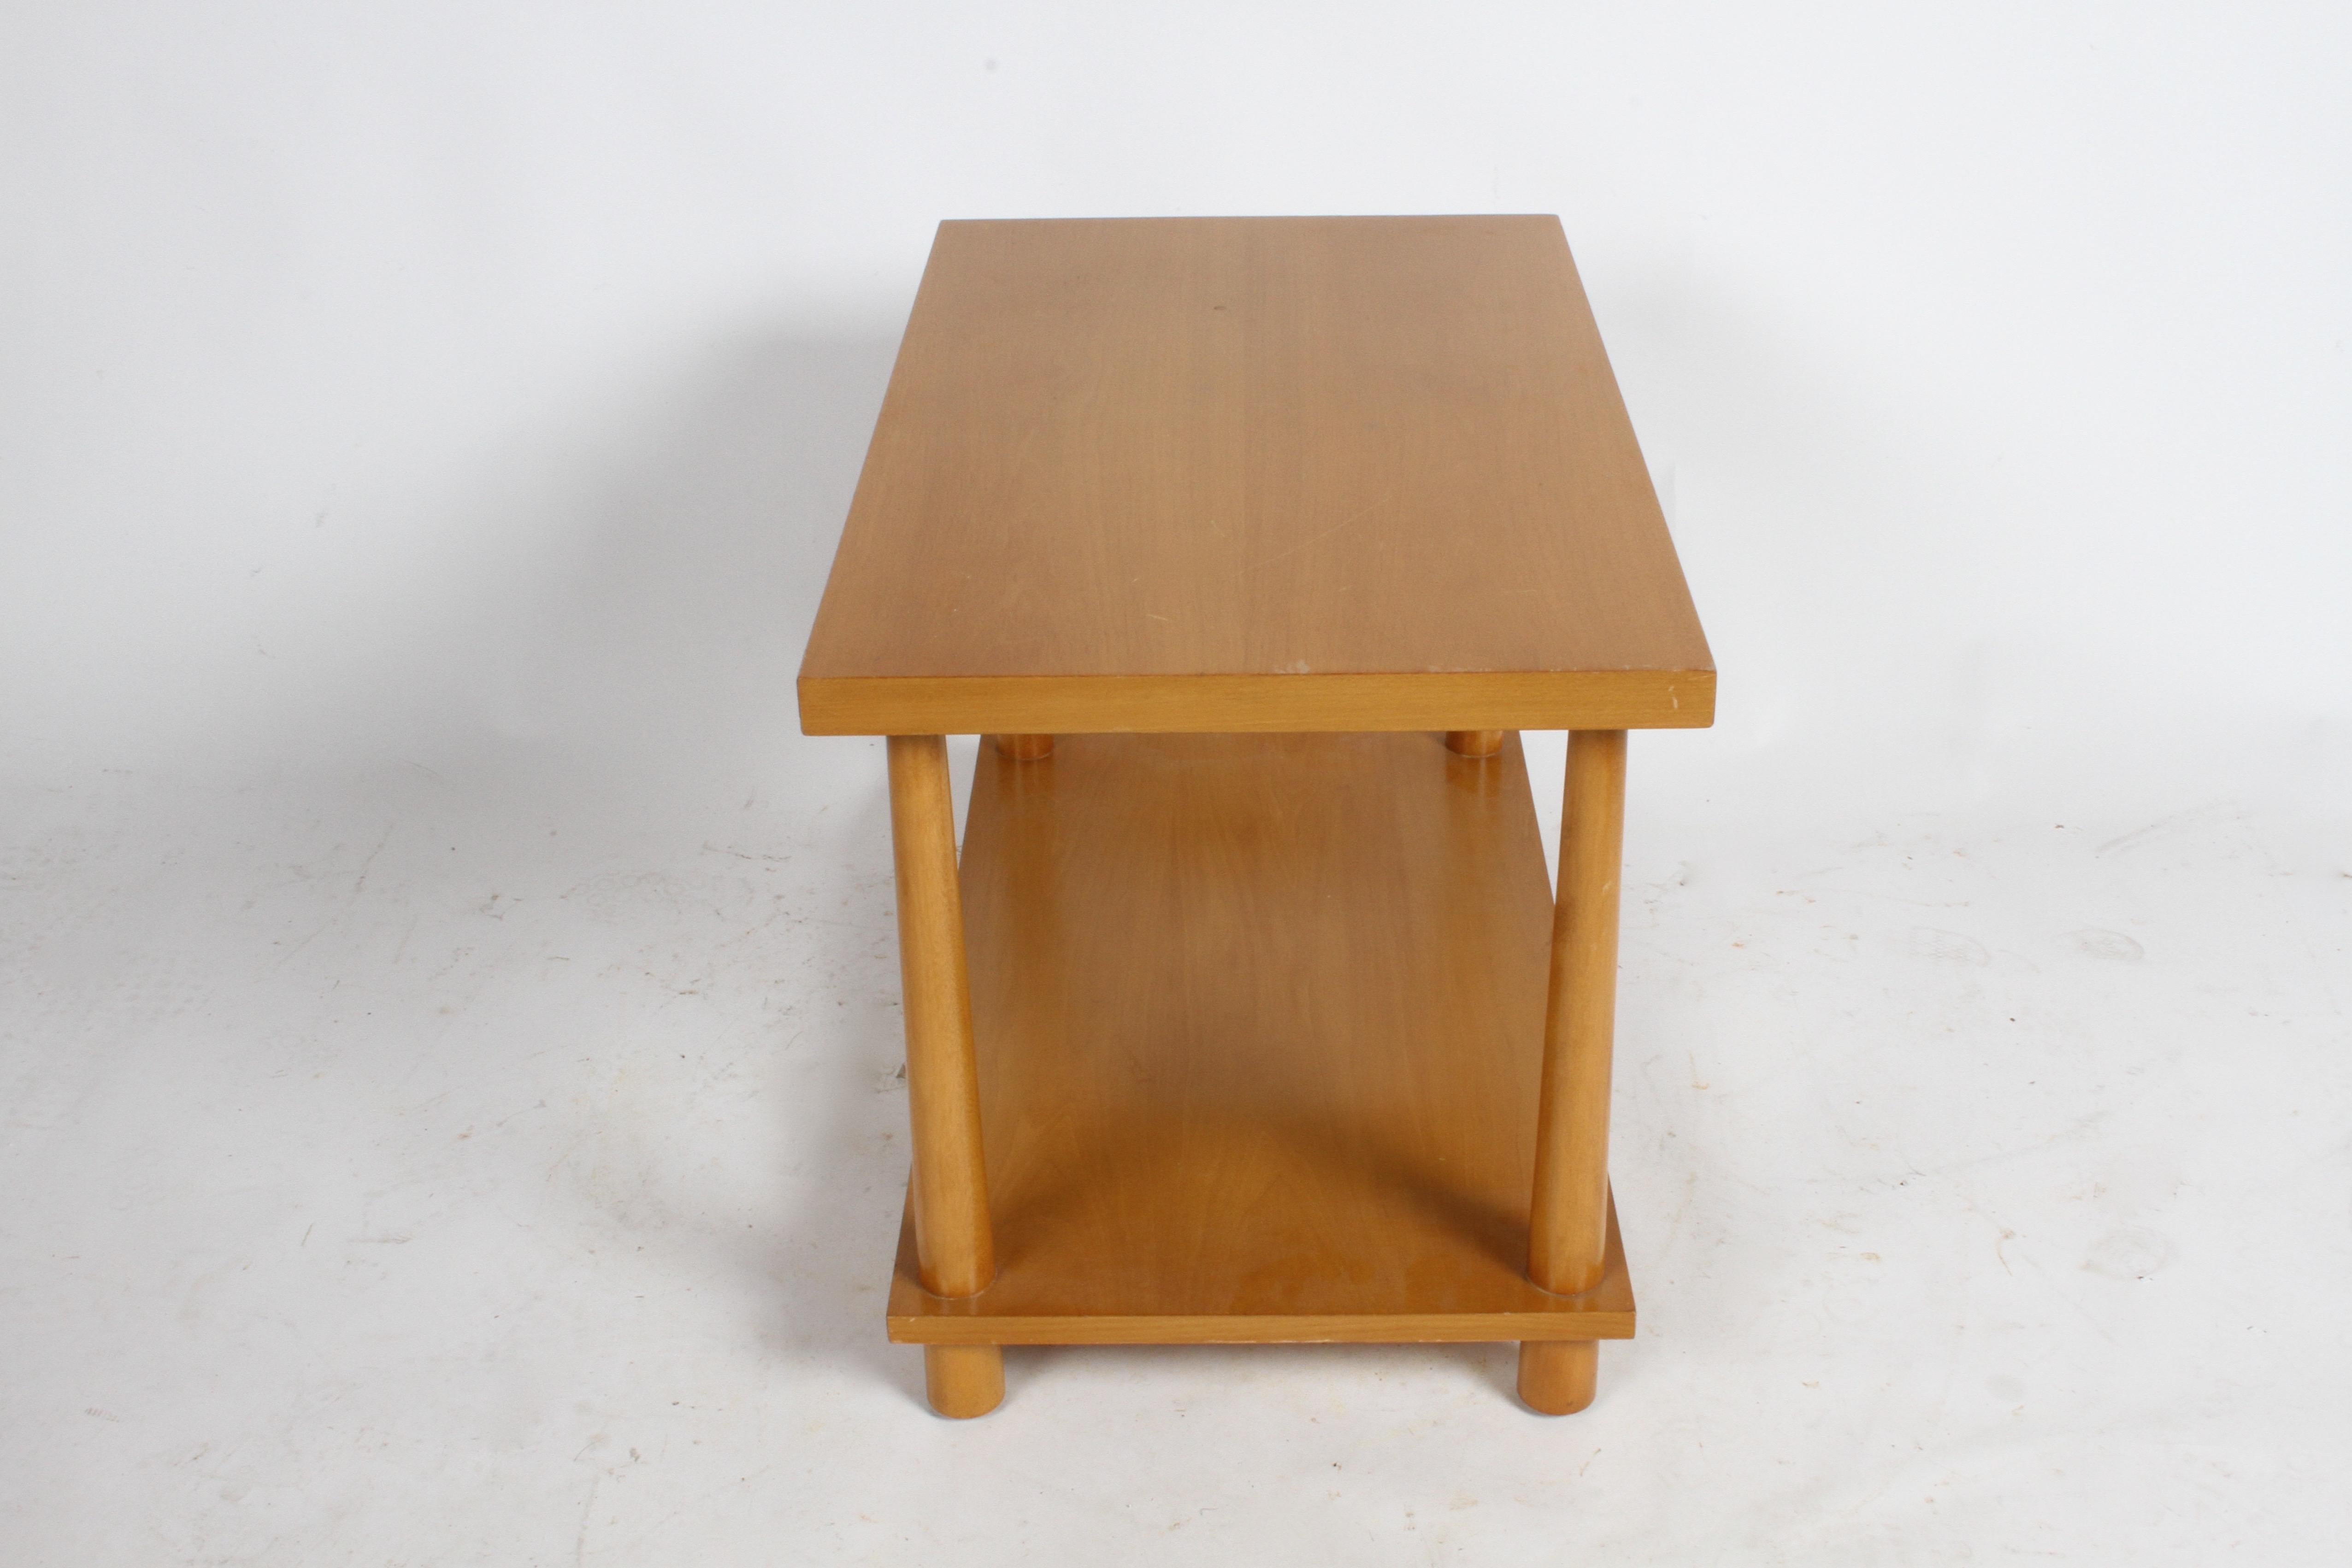 Pair of T.H. Robsjohn-Gibbings for Widdicomb with reverse tapered legs end tables, shown in original finish. Included in price is refinishing of walnut, either as shown in lighter finish or in a darker espresso finish. Widdicomb RJG Label with model